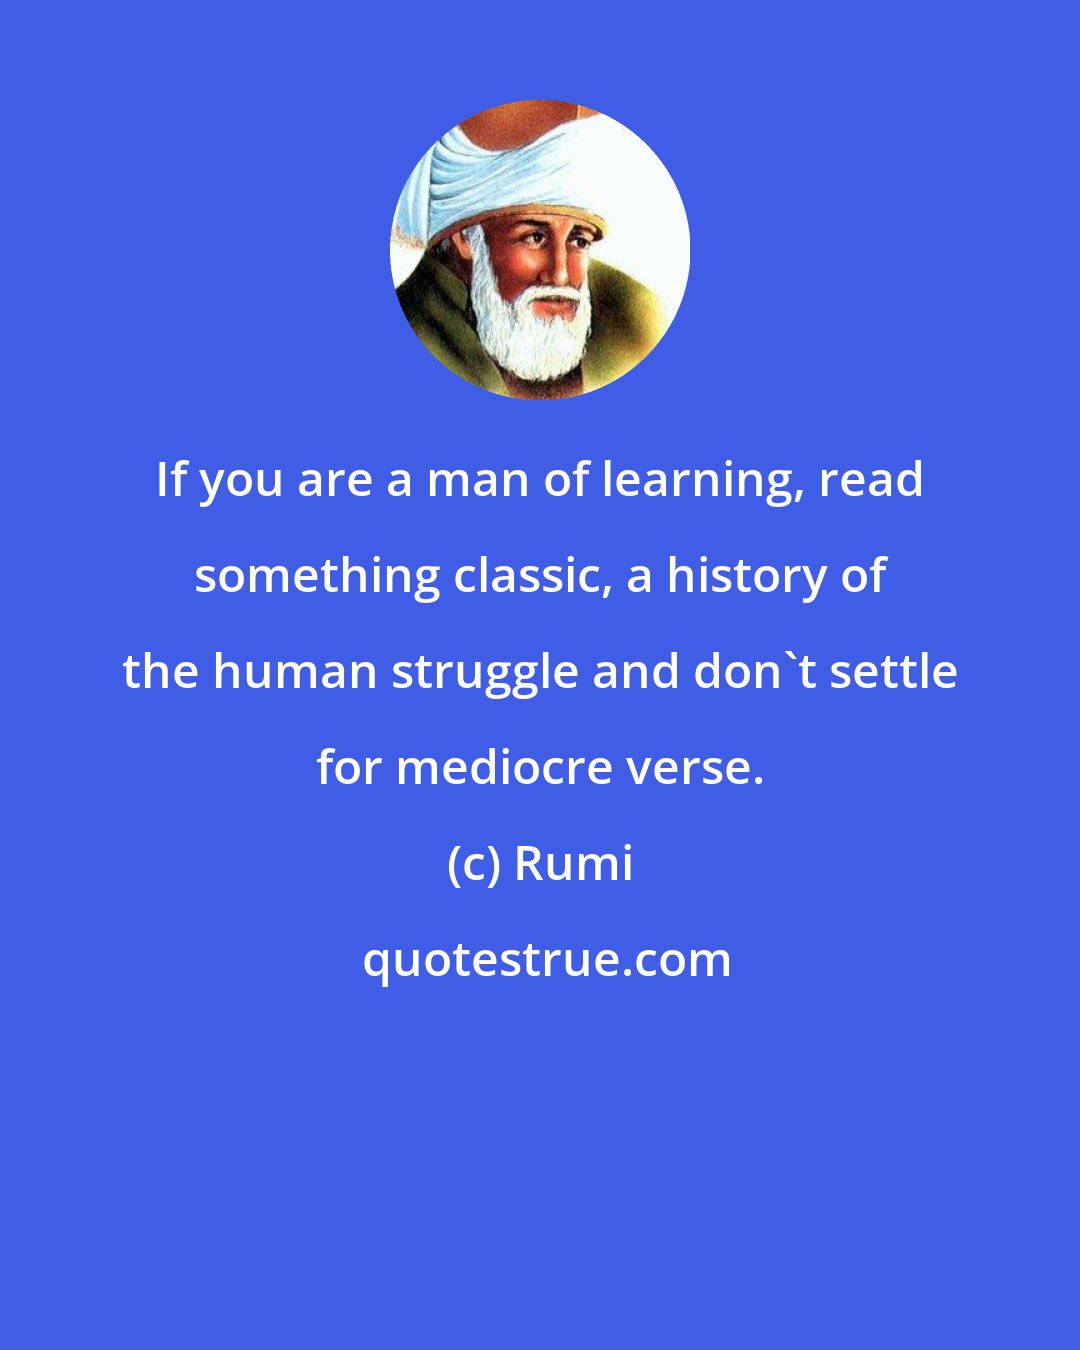 Rumi: If you are a man of learning, read something classic, a history of the human struggle and don't settle for mediocre verse.